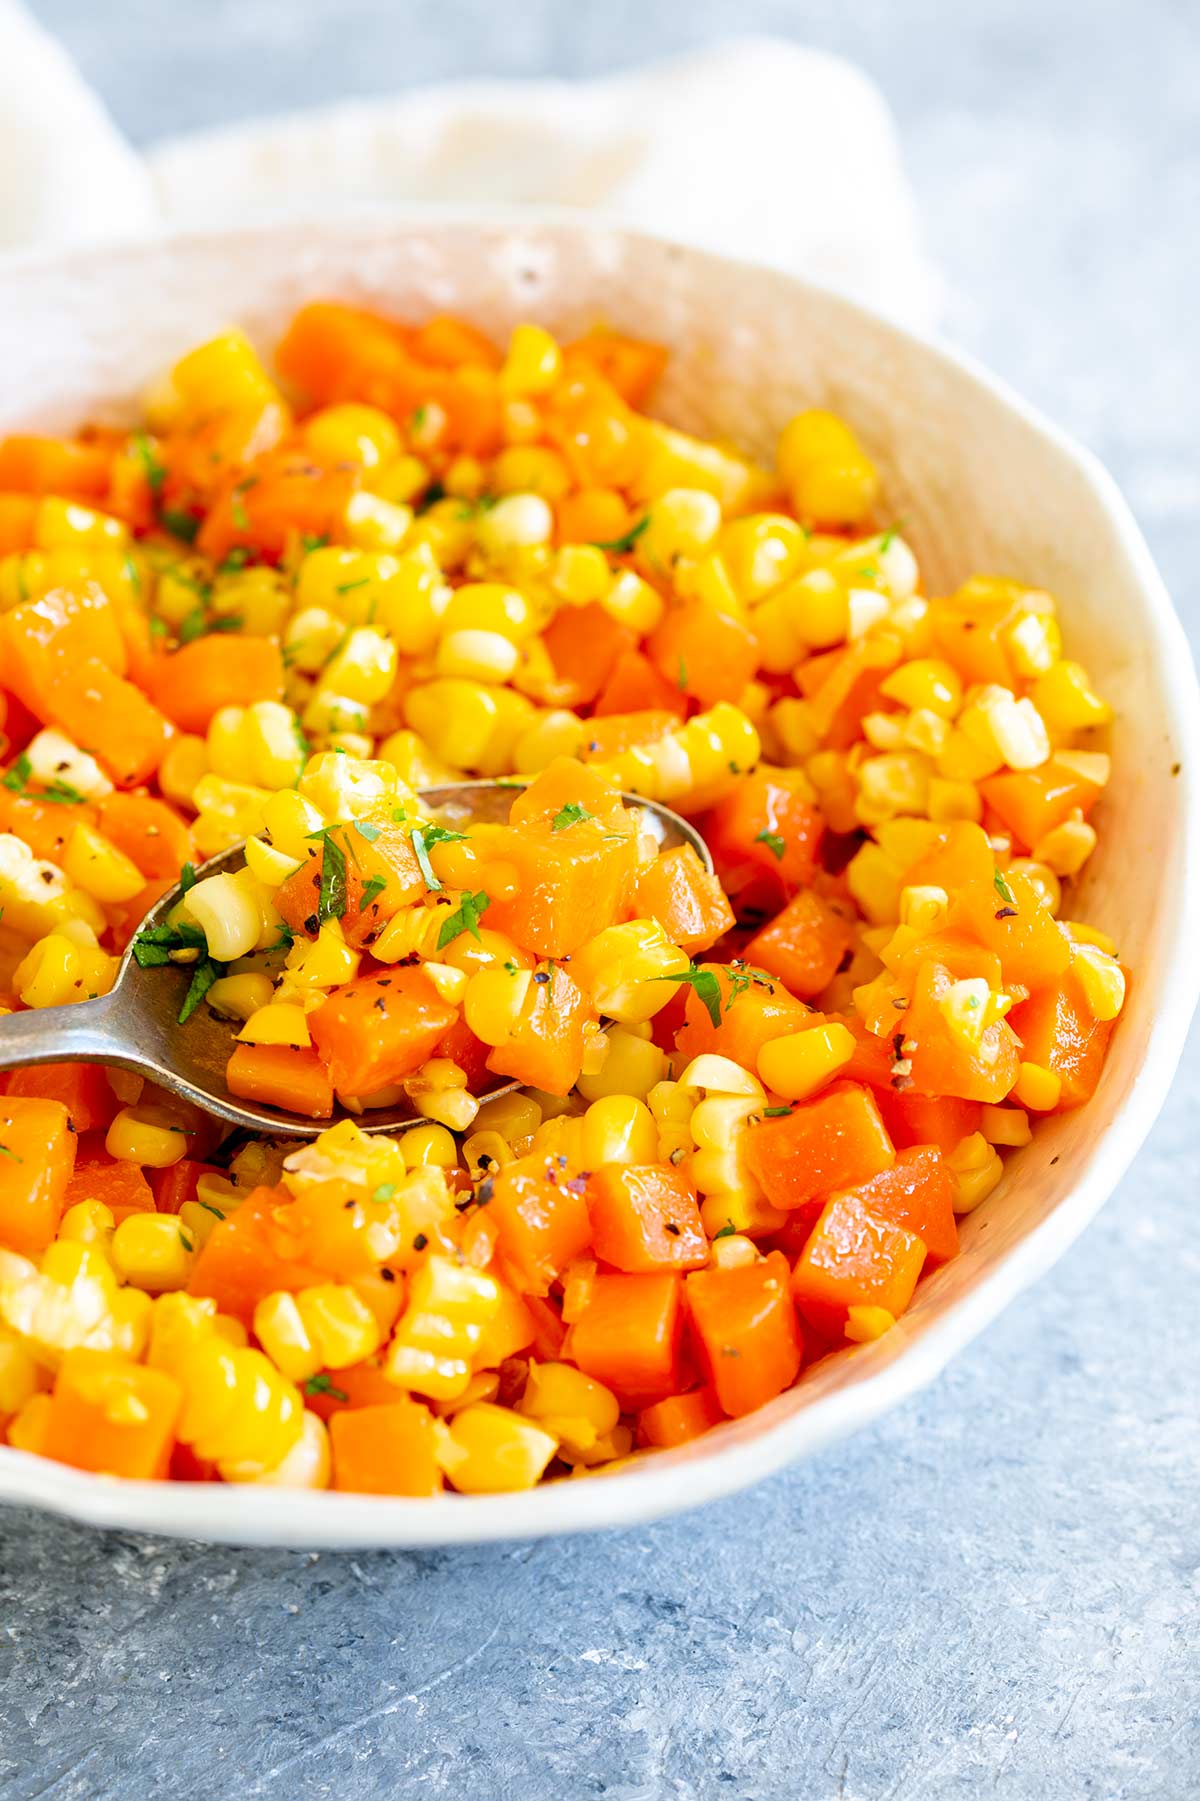 a whit bowl of carrots and corn on a grey table